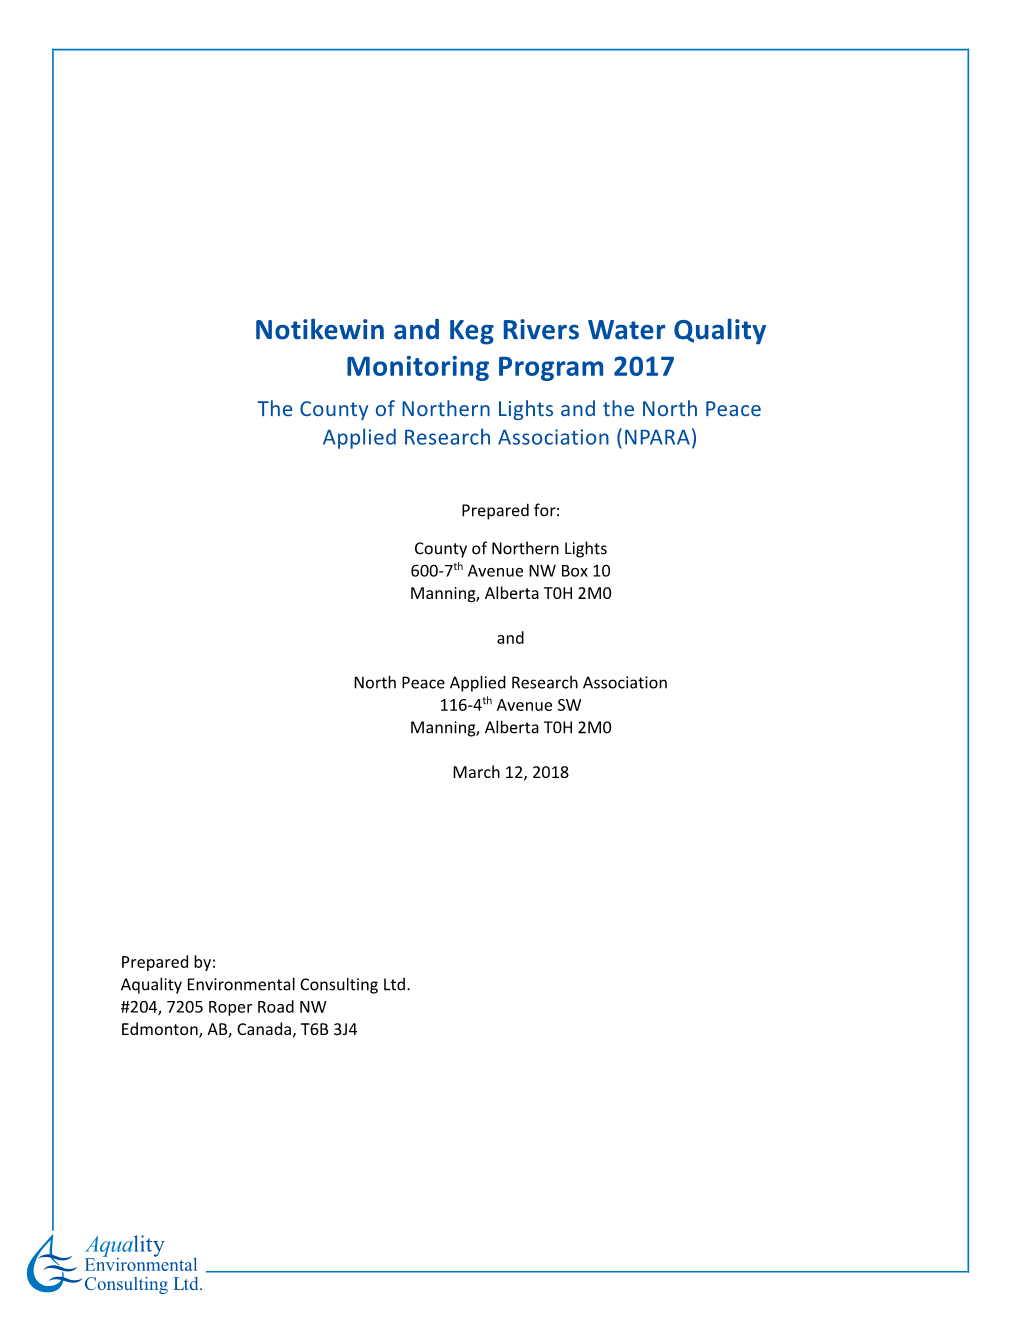 Notikewin and Keg Rivers Water Quality Monitoring Program 2017 the County of Northern Lights and the North Peace Applied Research Association (NPARA)